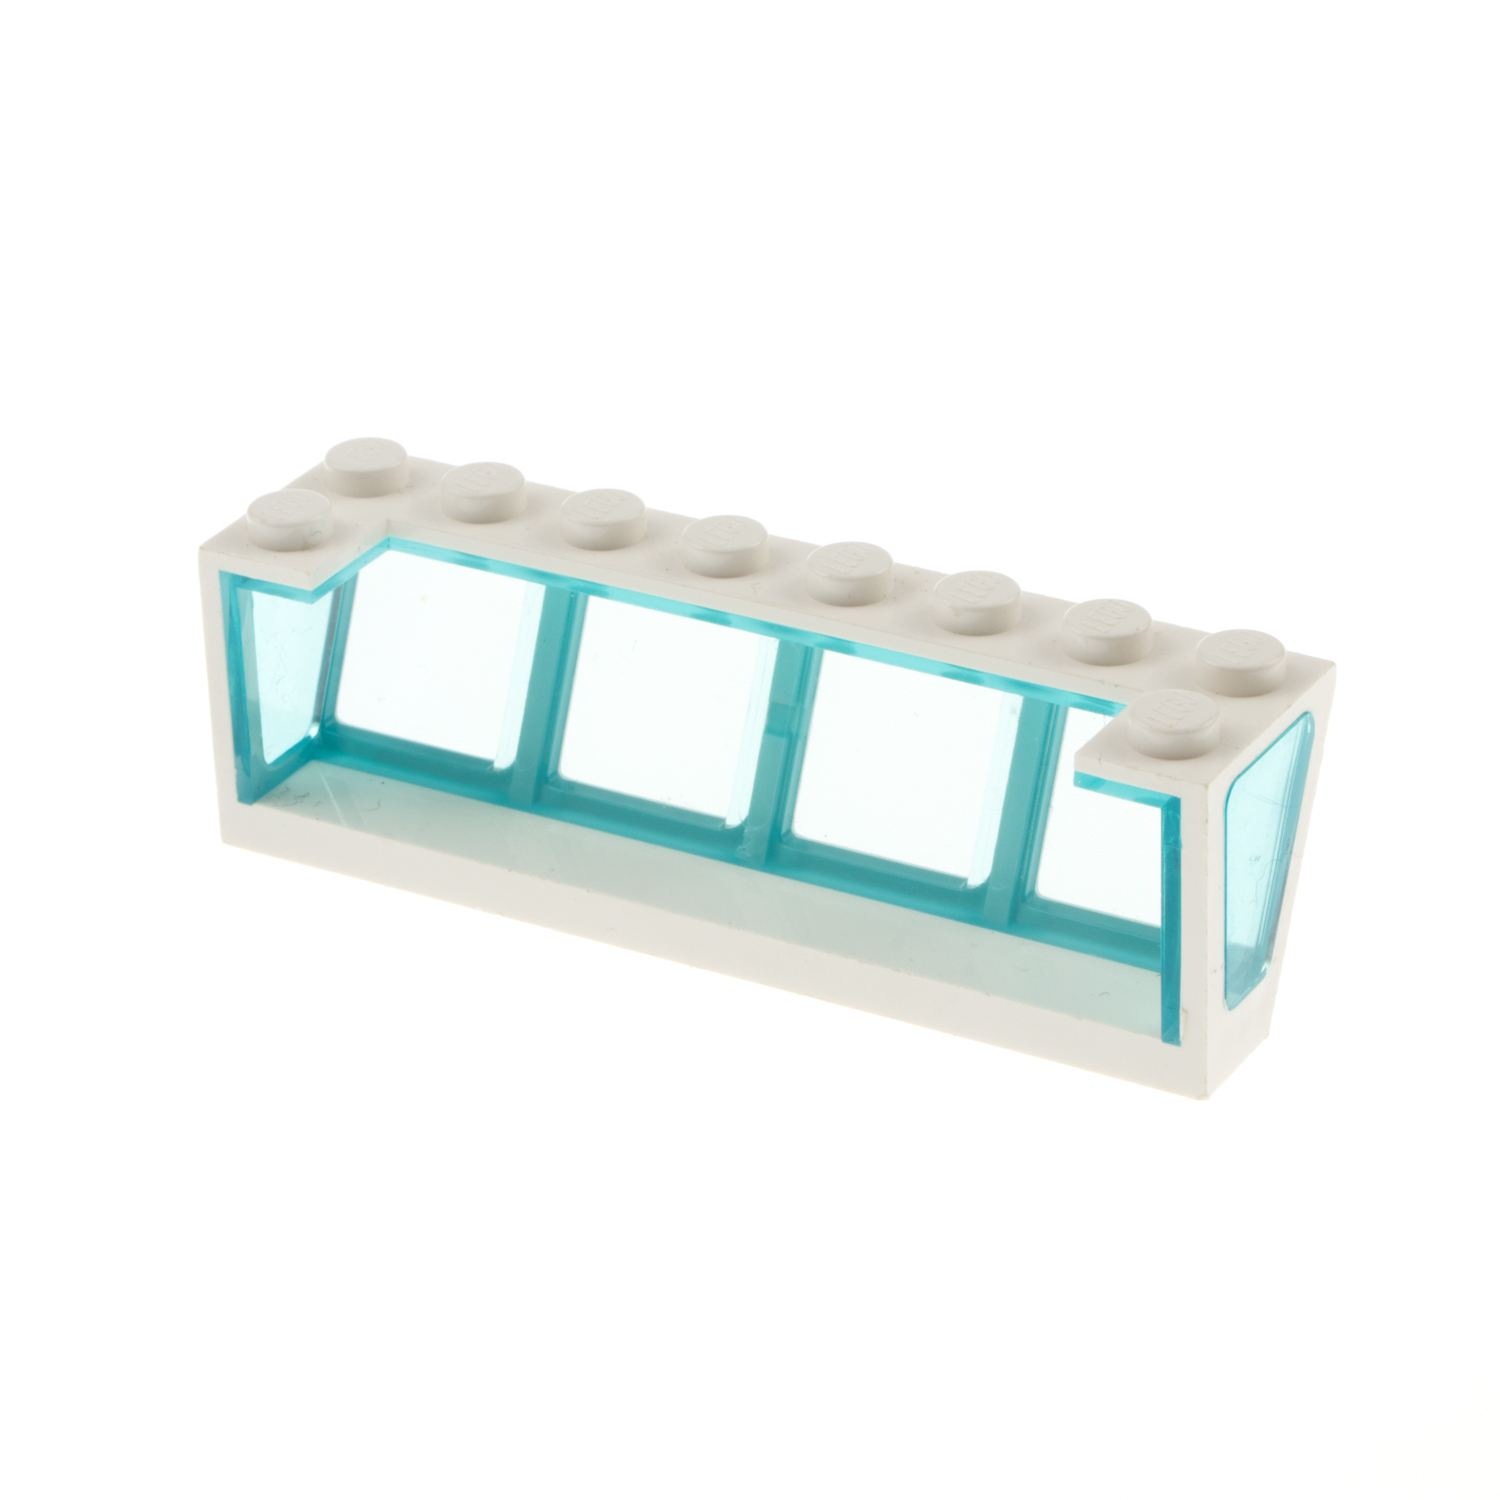 LEGO Bootsfenster weiß White Window 2x8x2 Boat with Fixed Glass 2634c02 